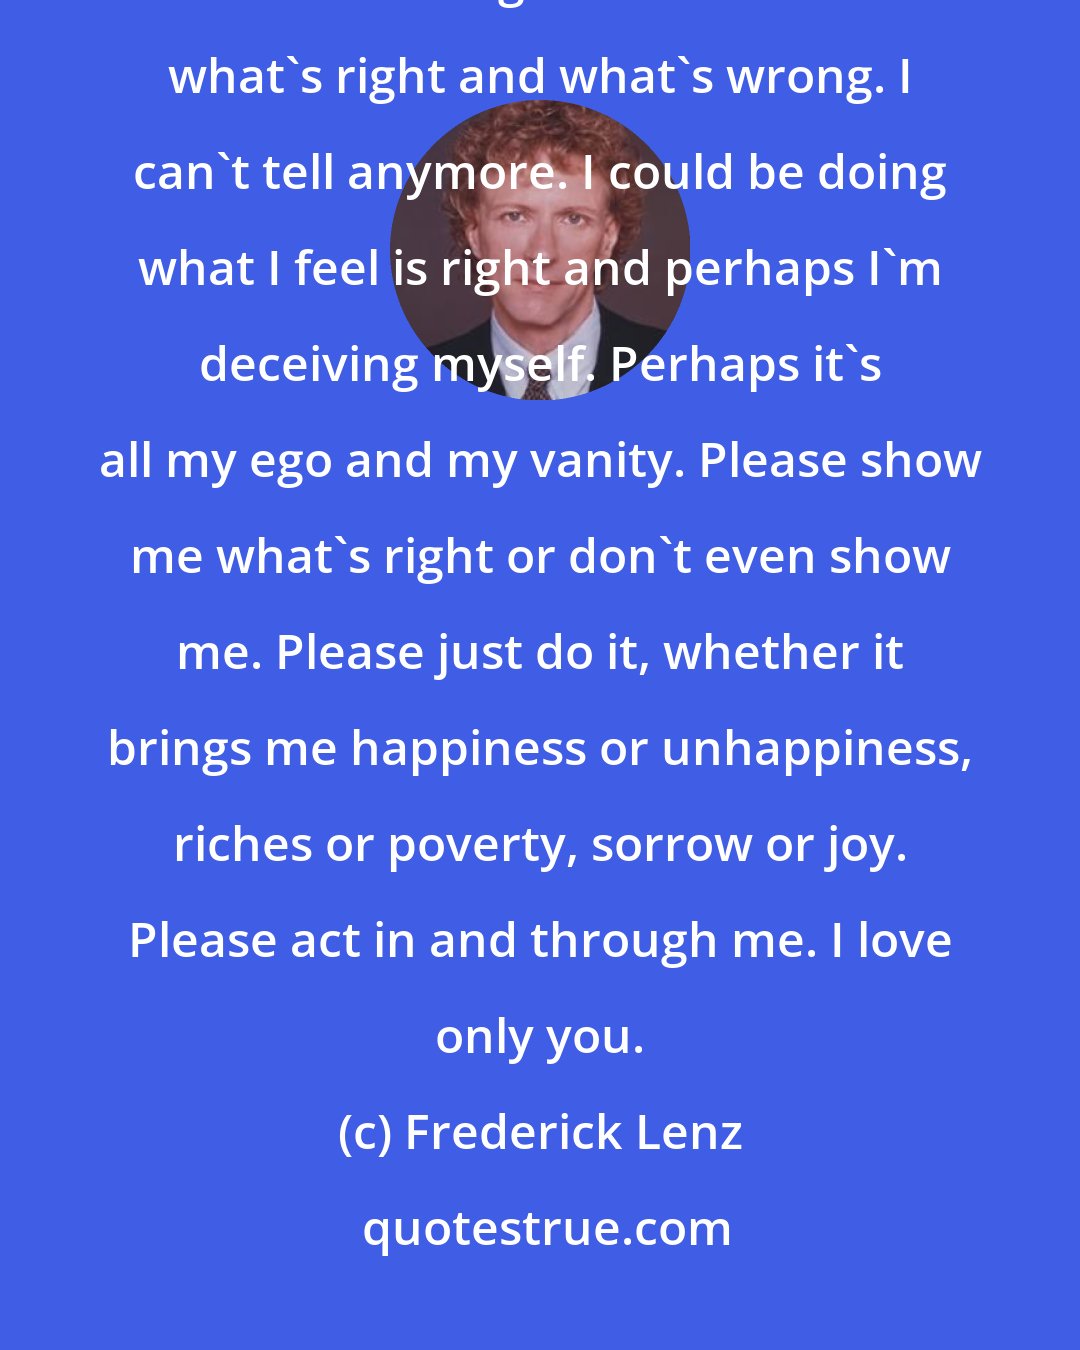 Frederick Lenz: Oh God, God, please come to me, please illumine me, please act in me and through me. I don't know what's right and what's wrong. I can't tell anymore. I could be doing what I feel is right and perhaps I'm deceiving myself. Perhaps it's all my ego and my vanity. Please show me what's right or don't even show me. Please just do it, whether it brings me happiness or unhappiness, riches or poverty, sorrow or joy. Please act in and through me. I love only you.